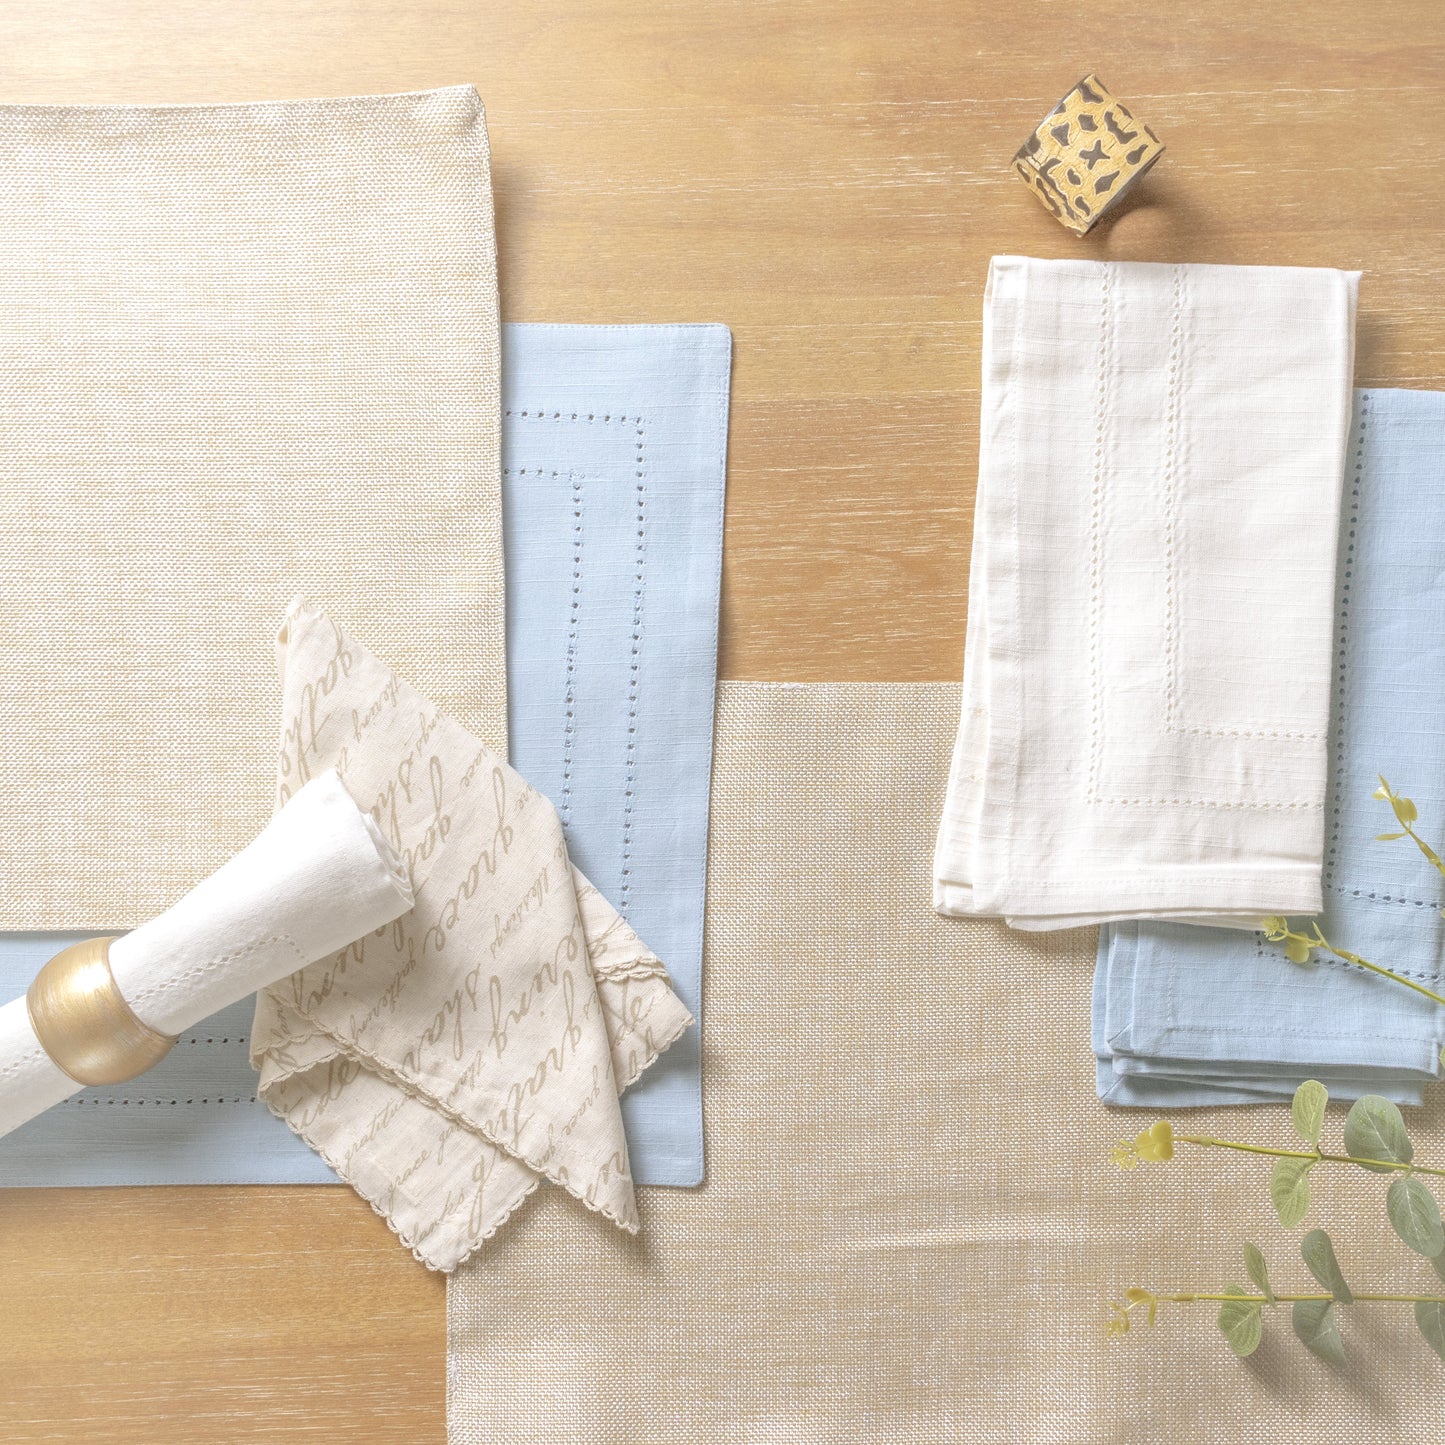 Pier 1 Mateo Cotton Set of 6 Placemats - The Home Resolution